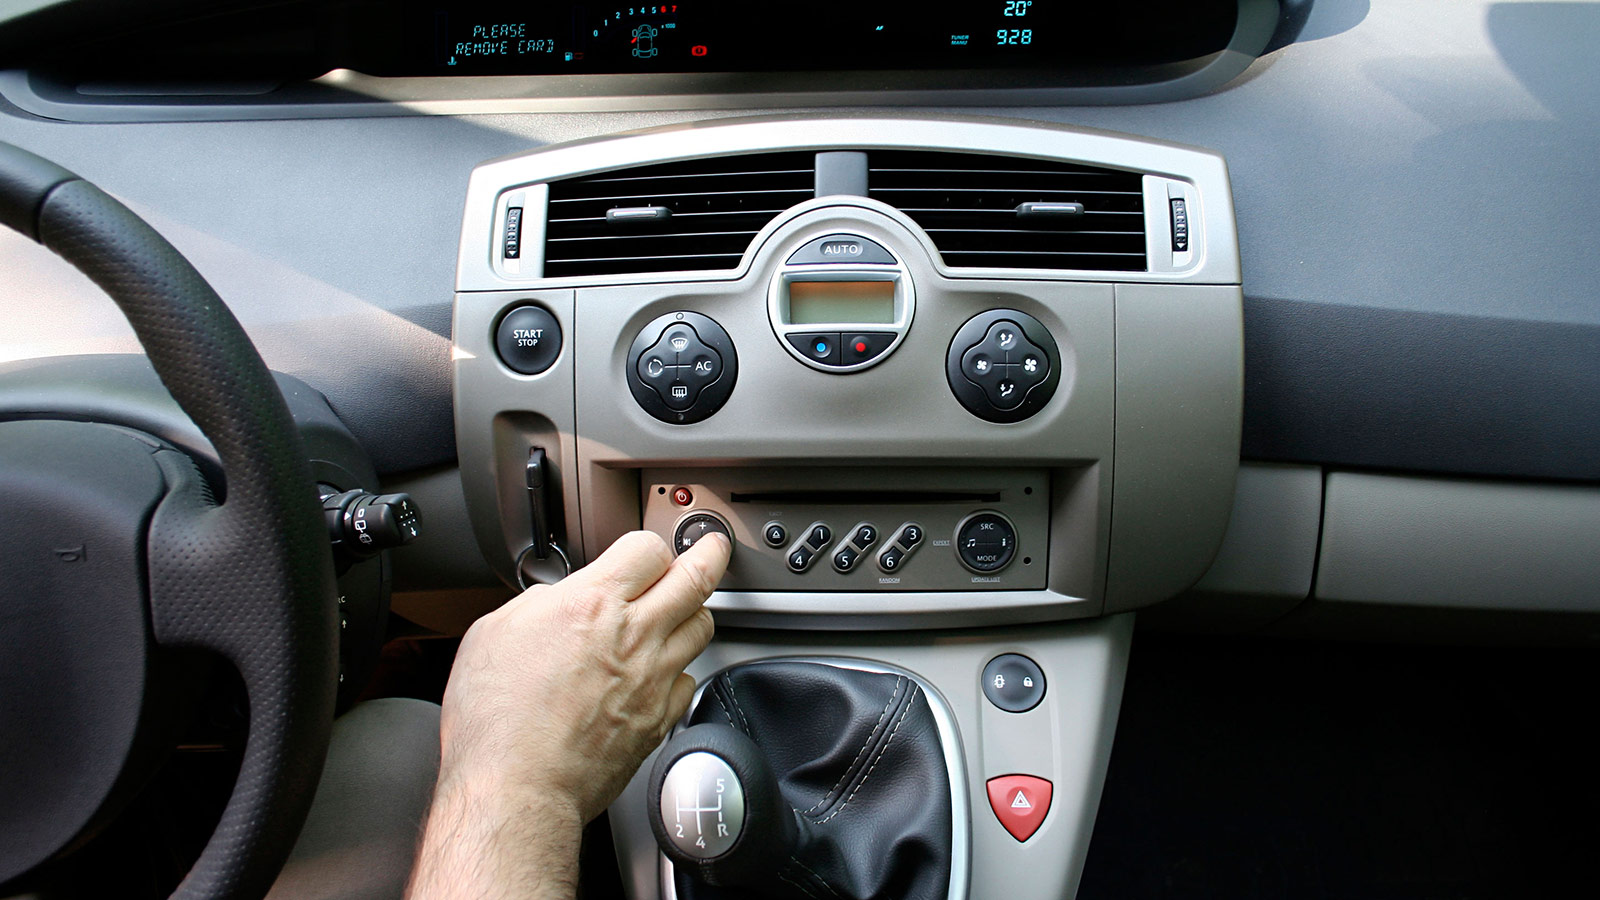 How To Keep The Radio On When Car Is Off